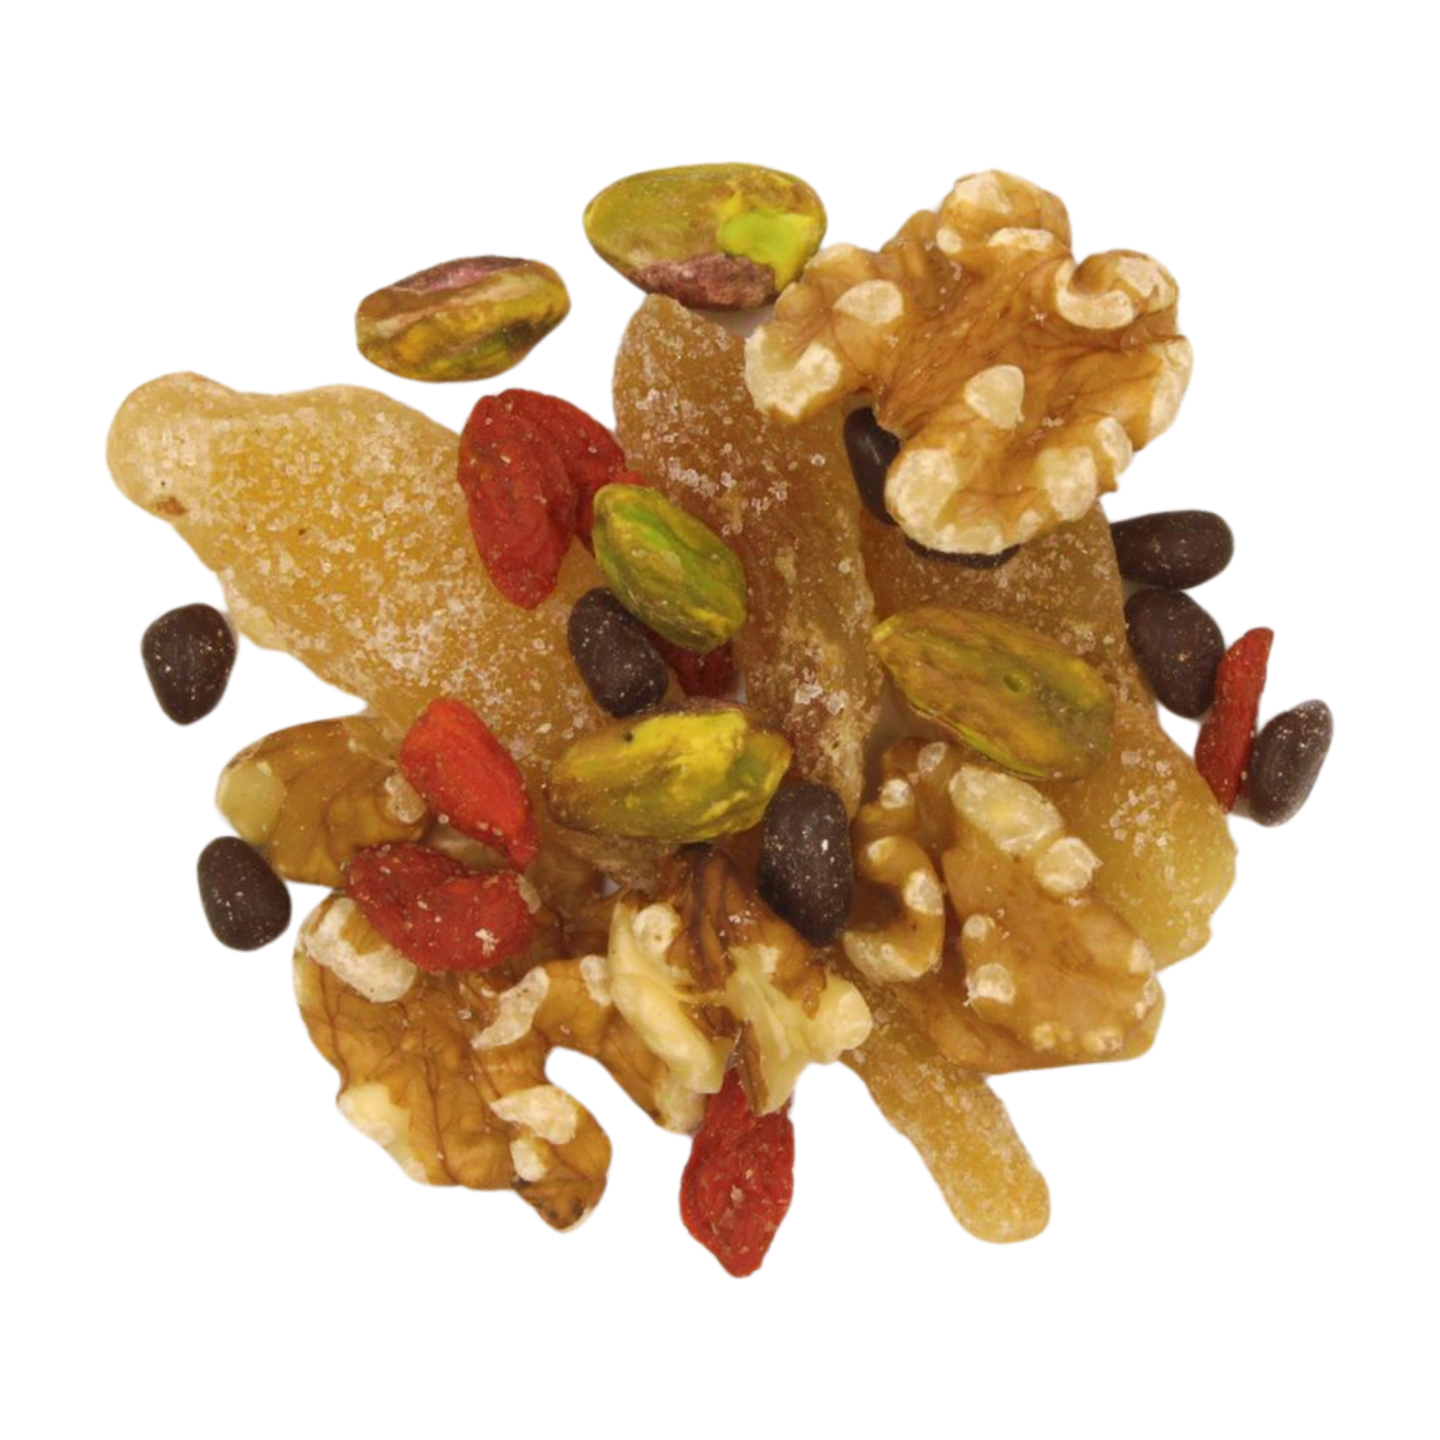 Superfood Snack Mix